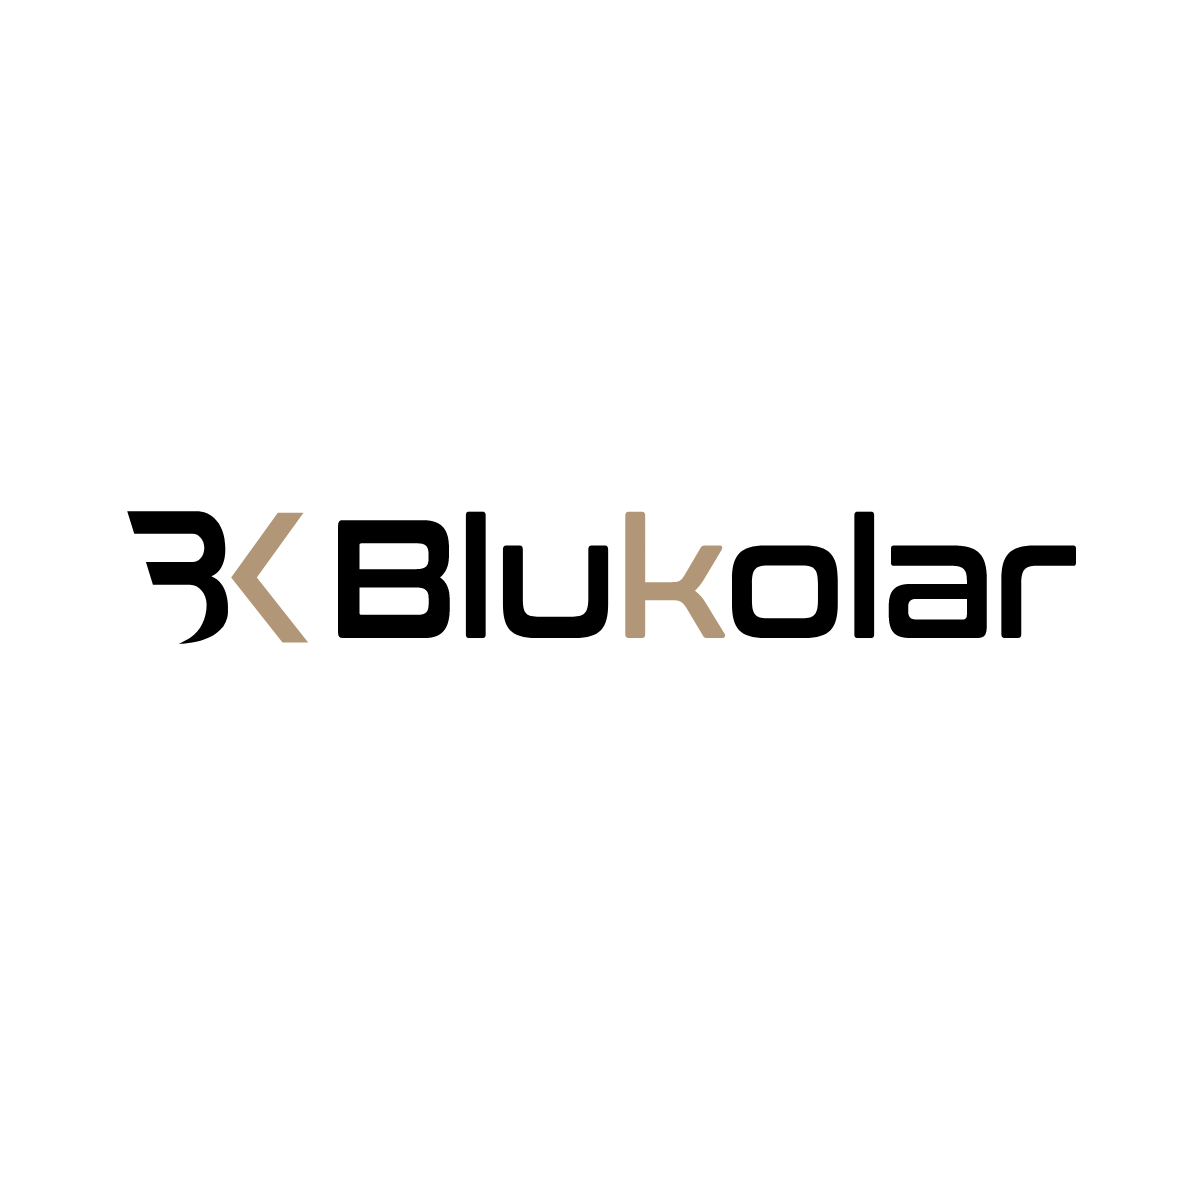 Blukolar|Accounting Services|Professional Services